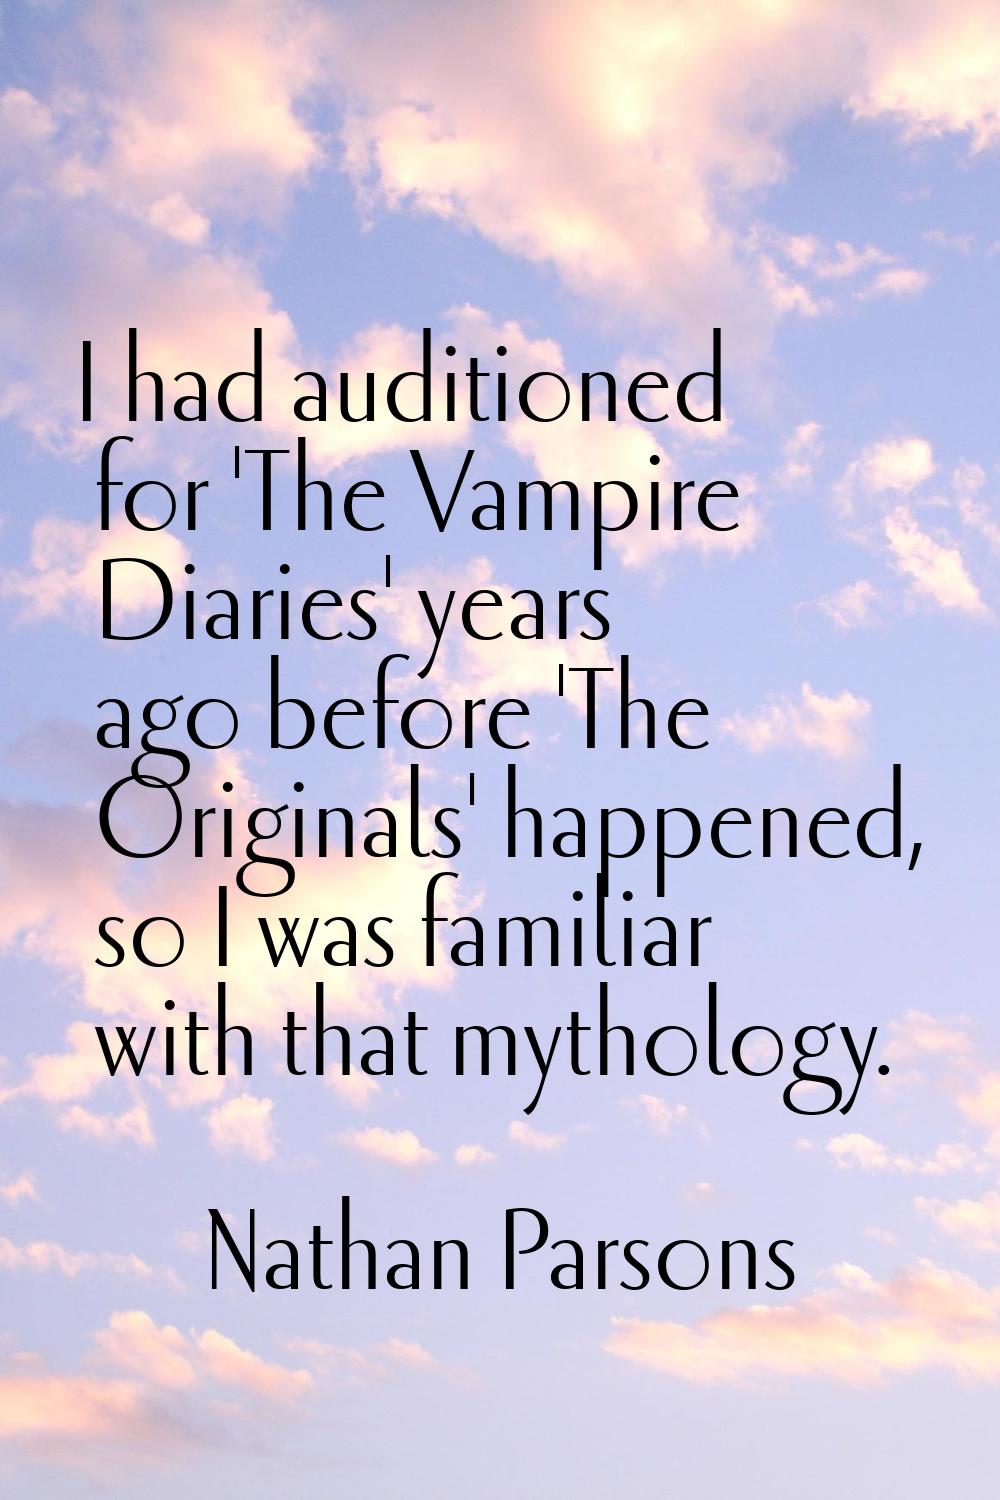 I had auditioned for 'The Vampire Diaries' years ago before 'The Originals' happened, so I was fami